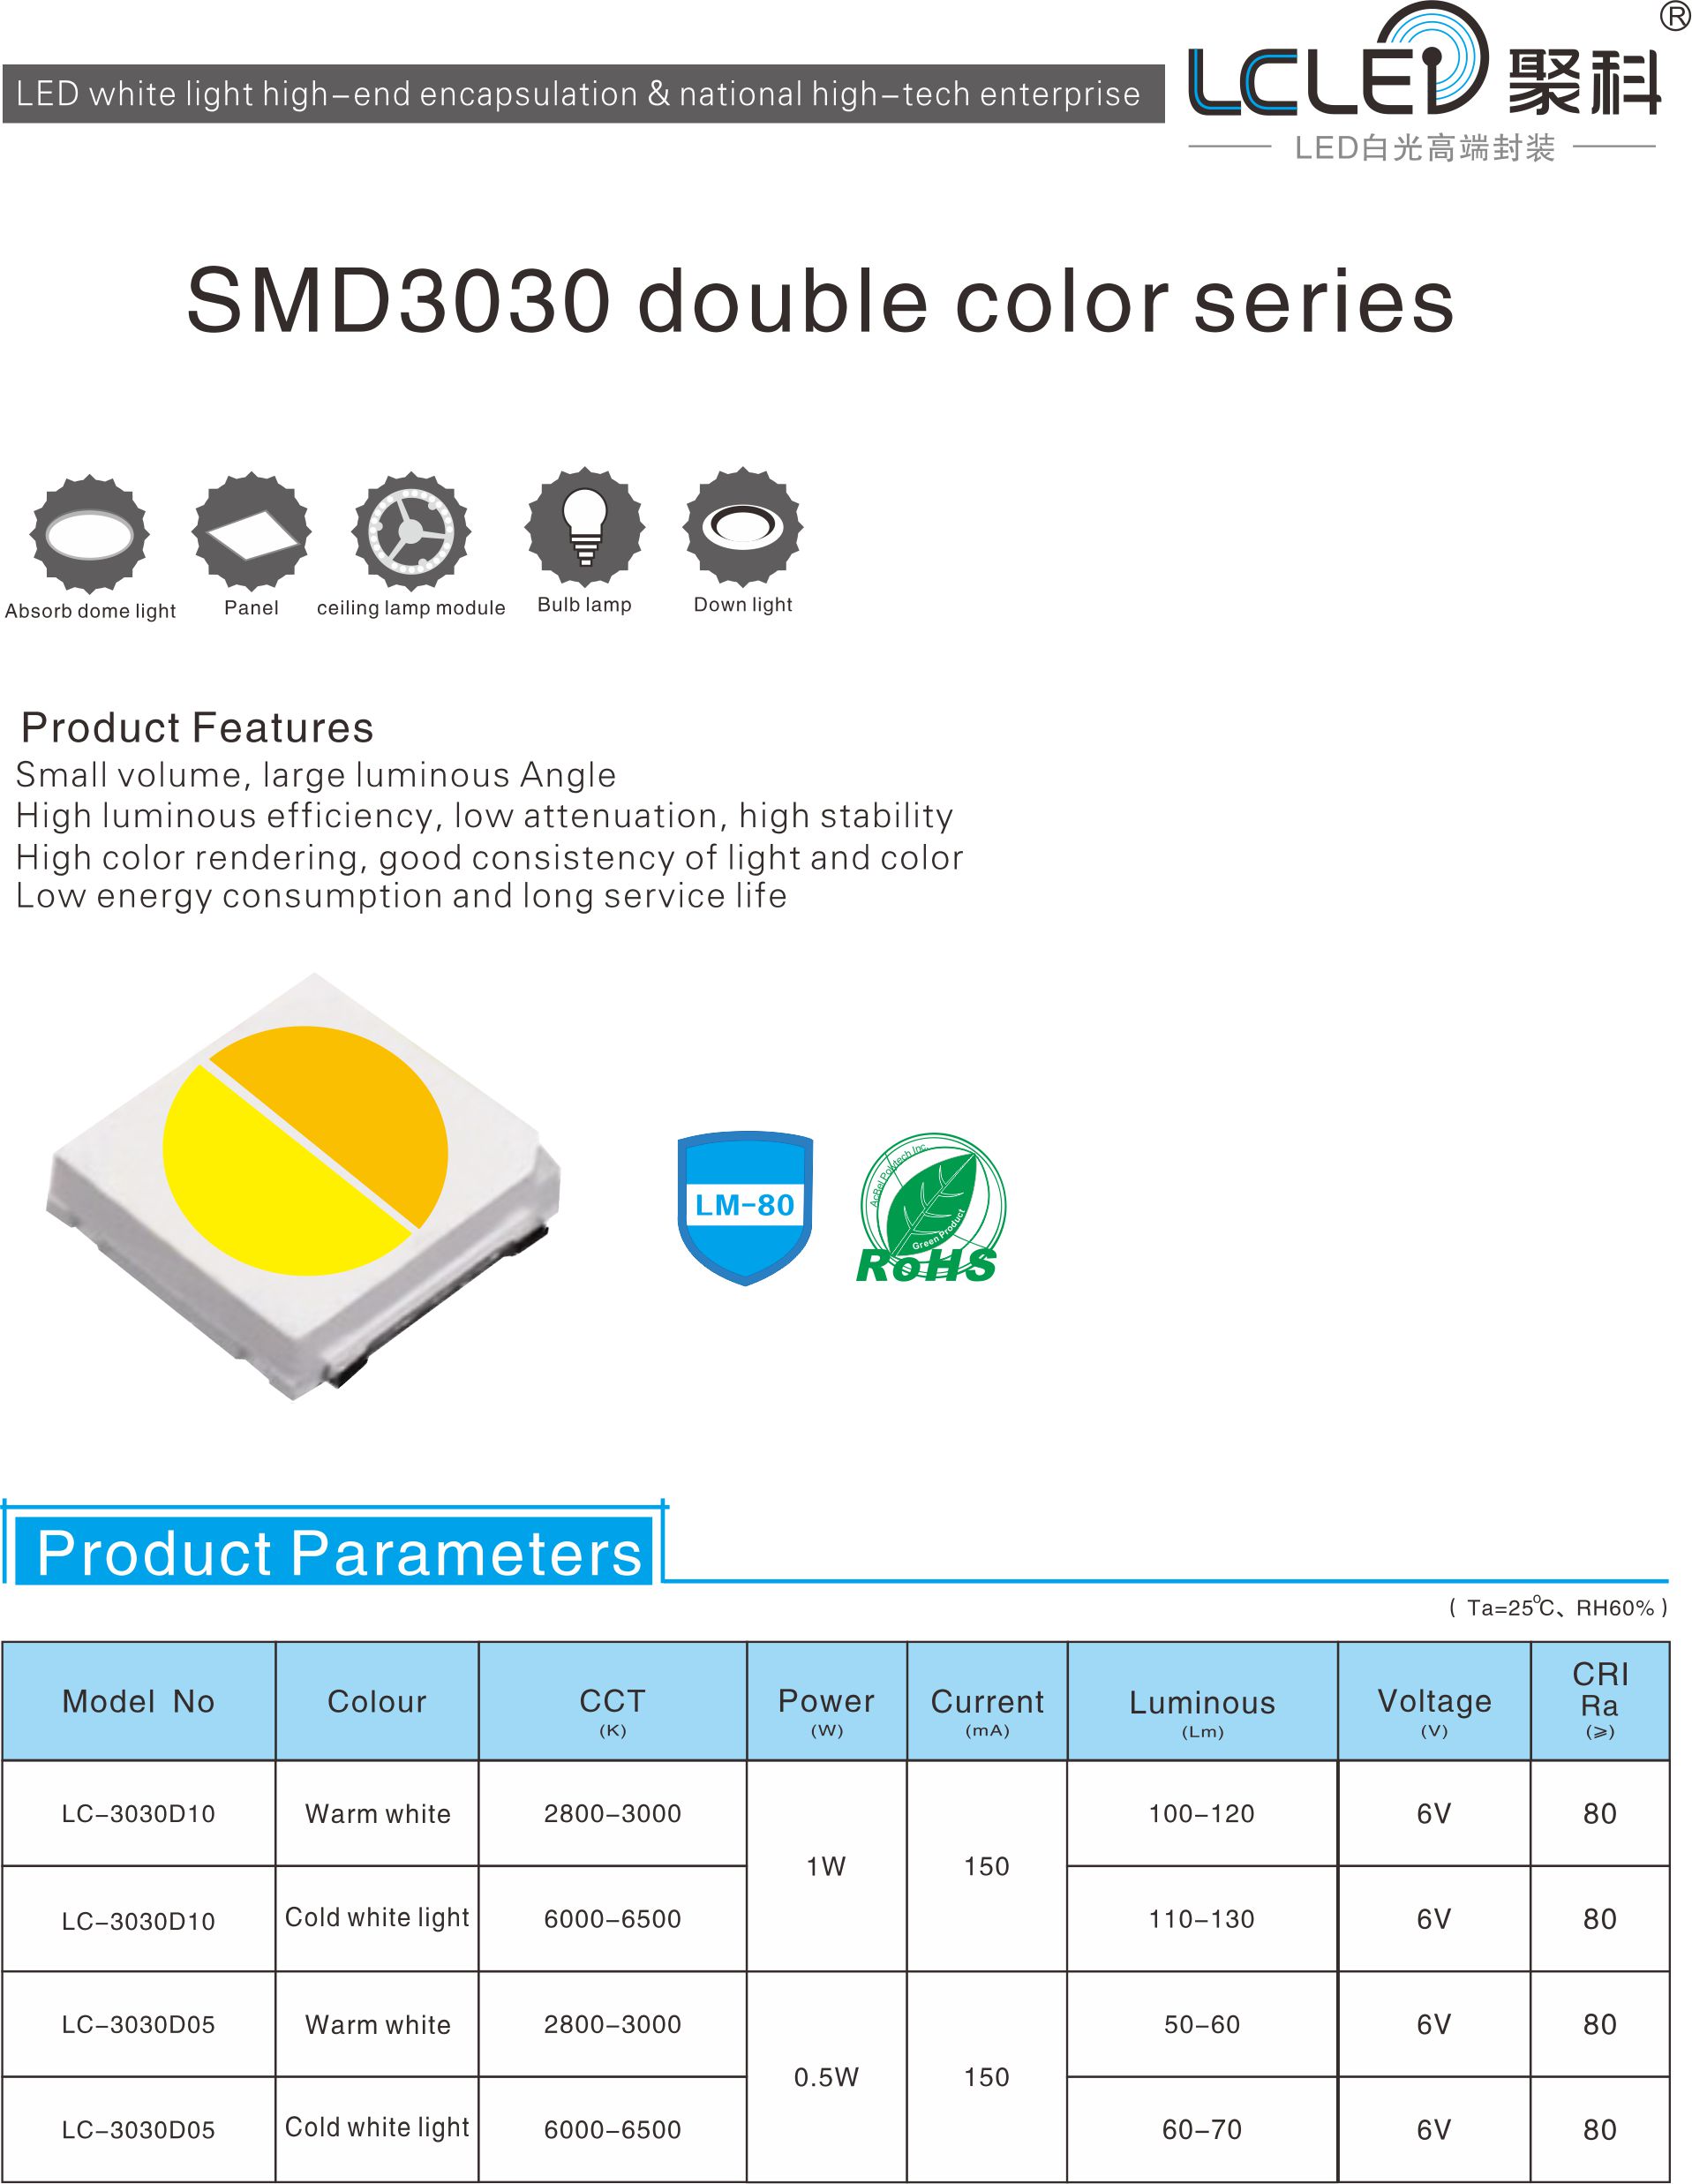 SMD3030 Double color